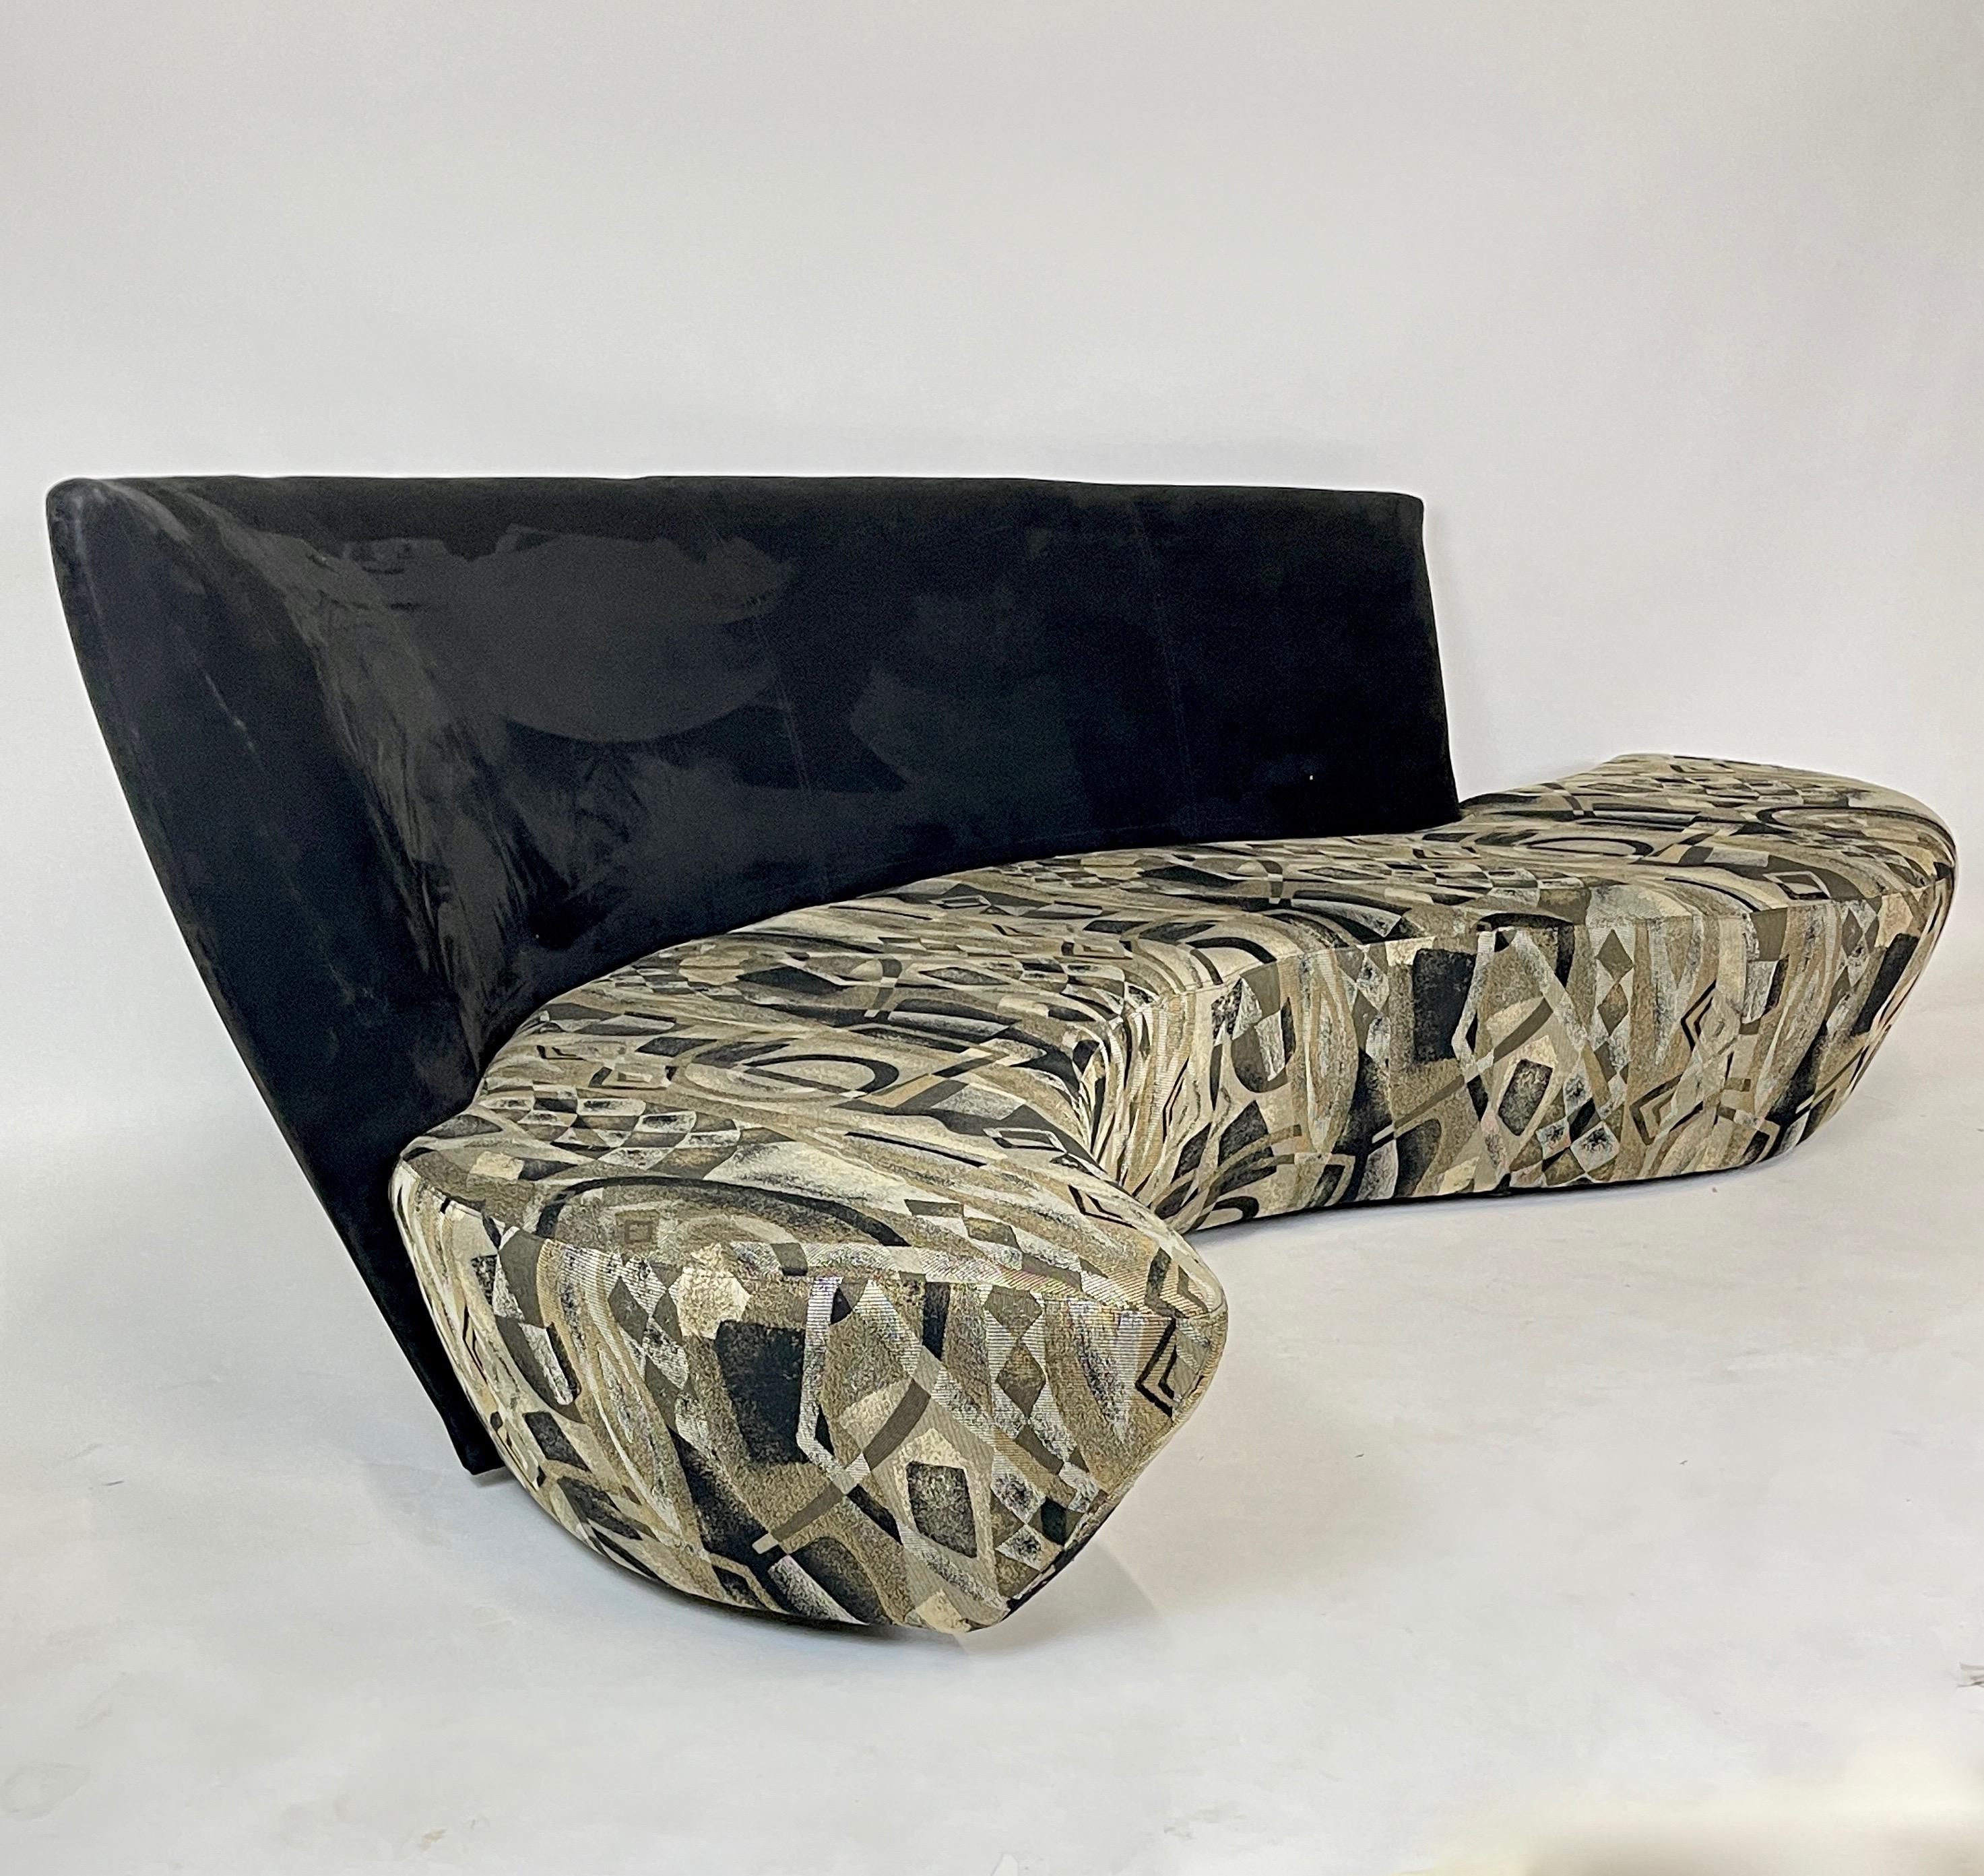 Incredible pair of serpentine mirror image Bilbao sofas designed by Vladimir Kagan in 1998 and manufactured by Weiman/ Preview. Buy one or both. Priced per sofa- you can choose either orientation if buying one. This piece is well documented in the